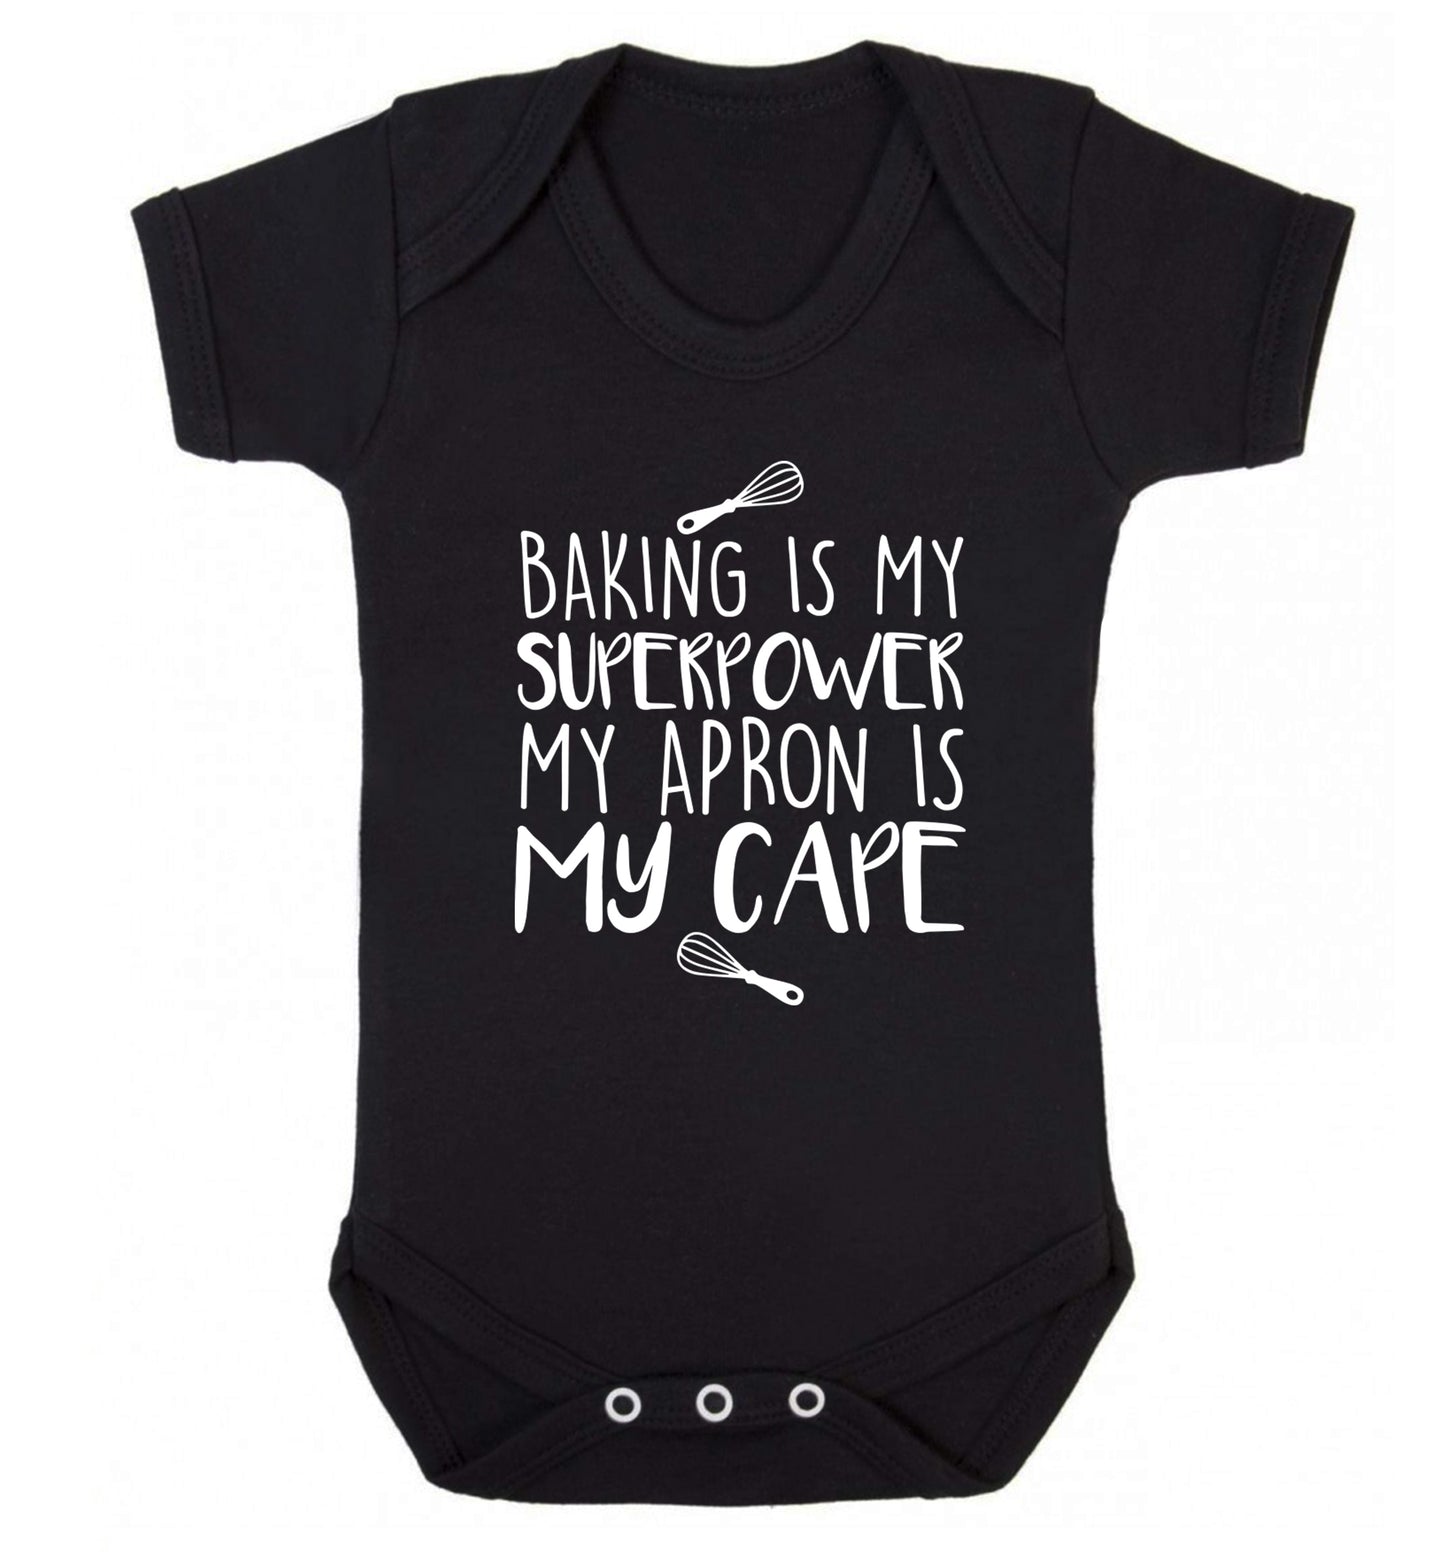 Baking is my superpower my apron is my cape Baby Vest black 18-24 months